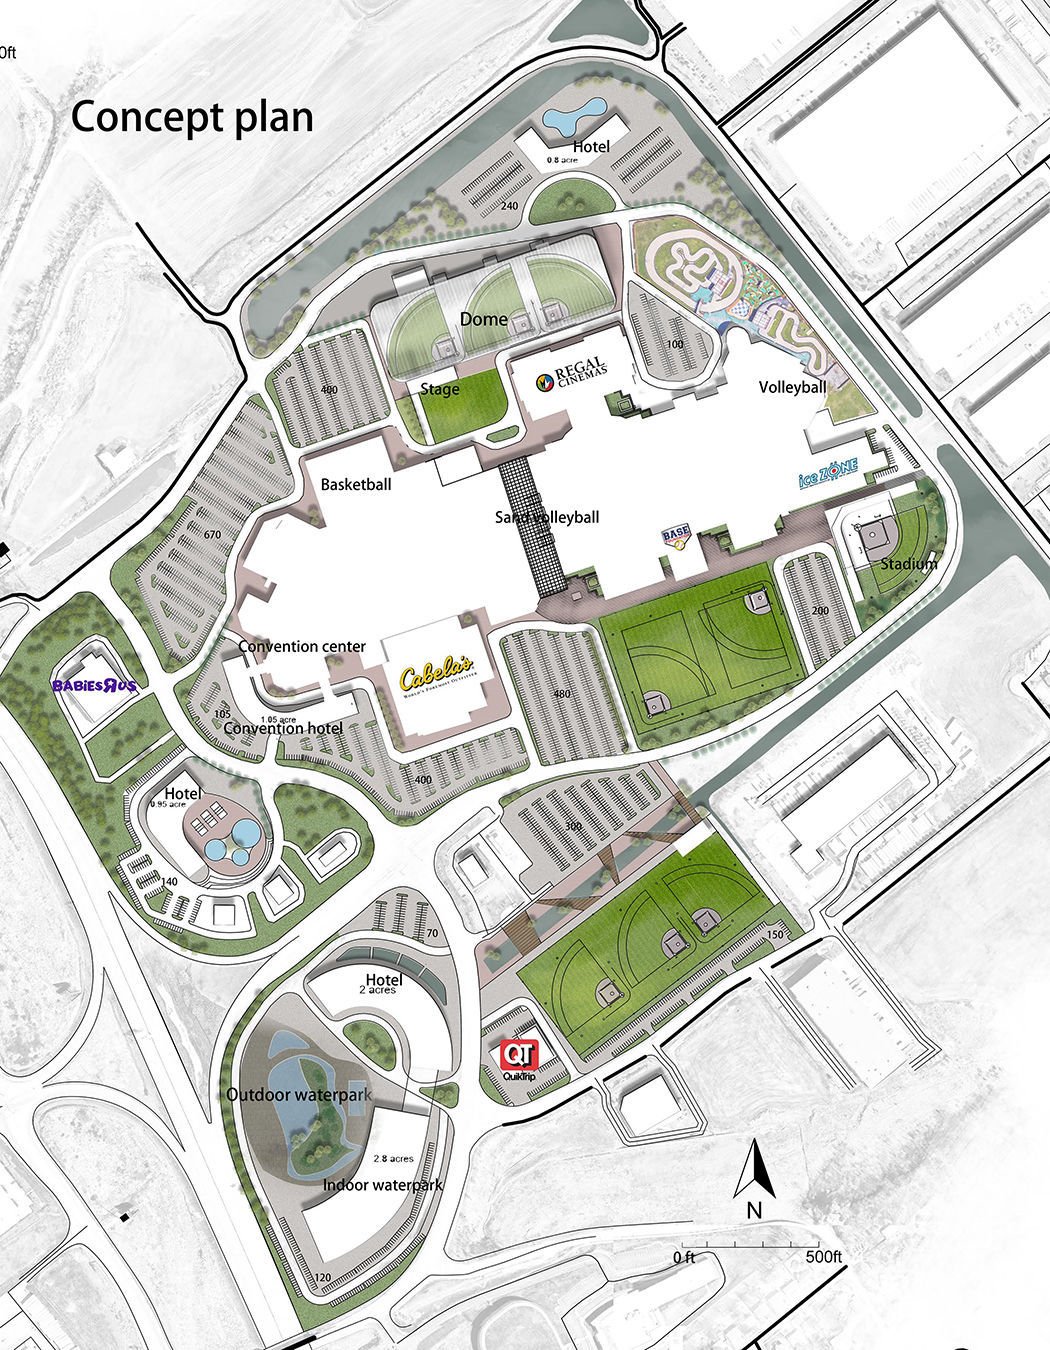 St. Louis County to examine aid for youth sports complex at Hazelwood mall | Business | 0